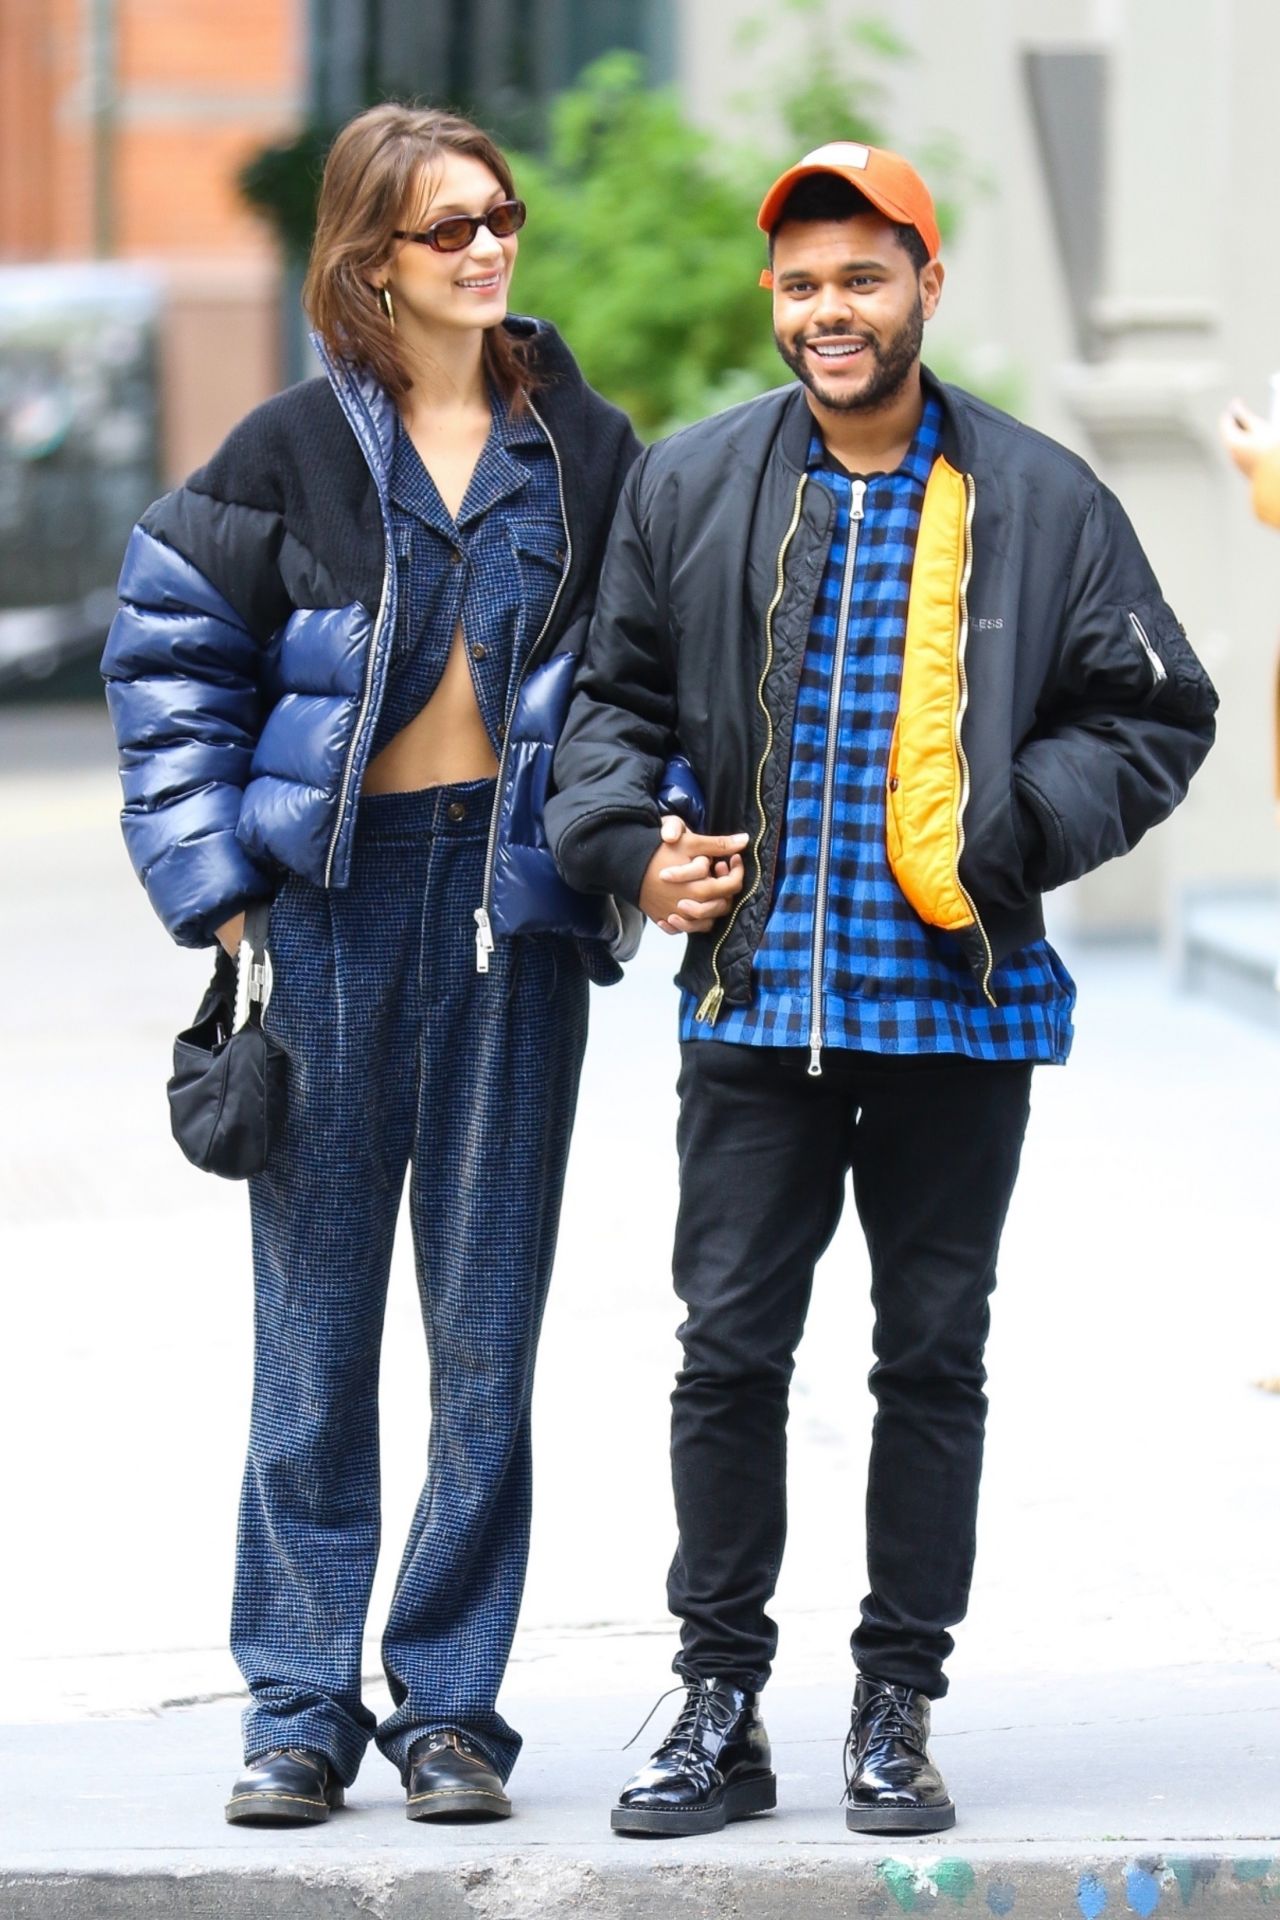 bella-hadid-and-the-weeknd-out-in-new-york-city-10-29-2018-4.jpg